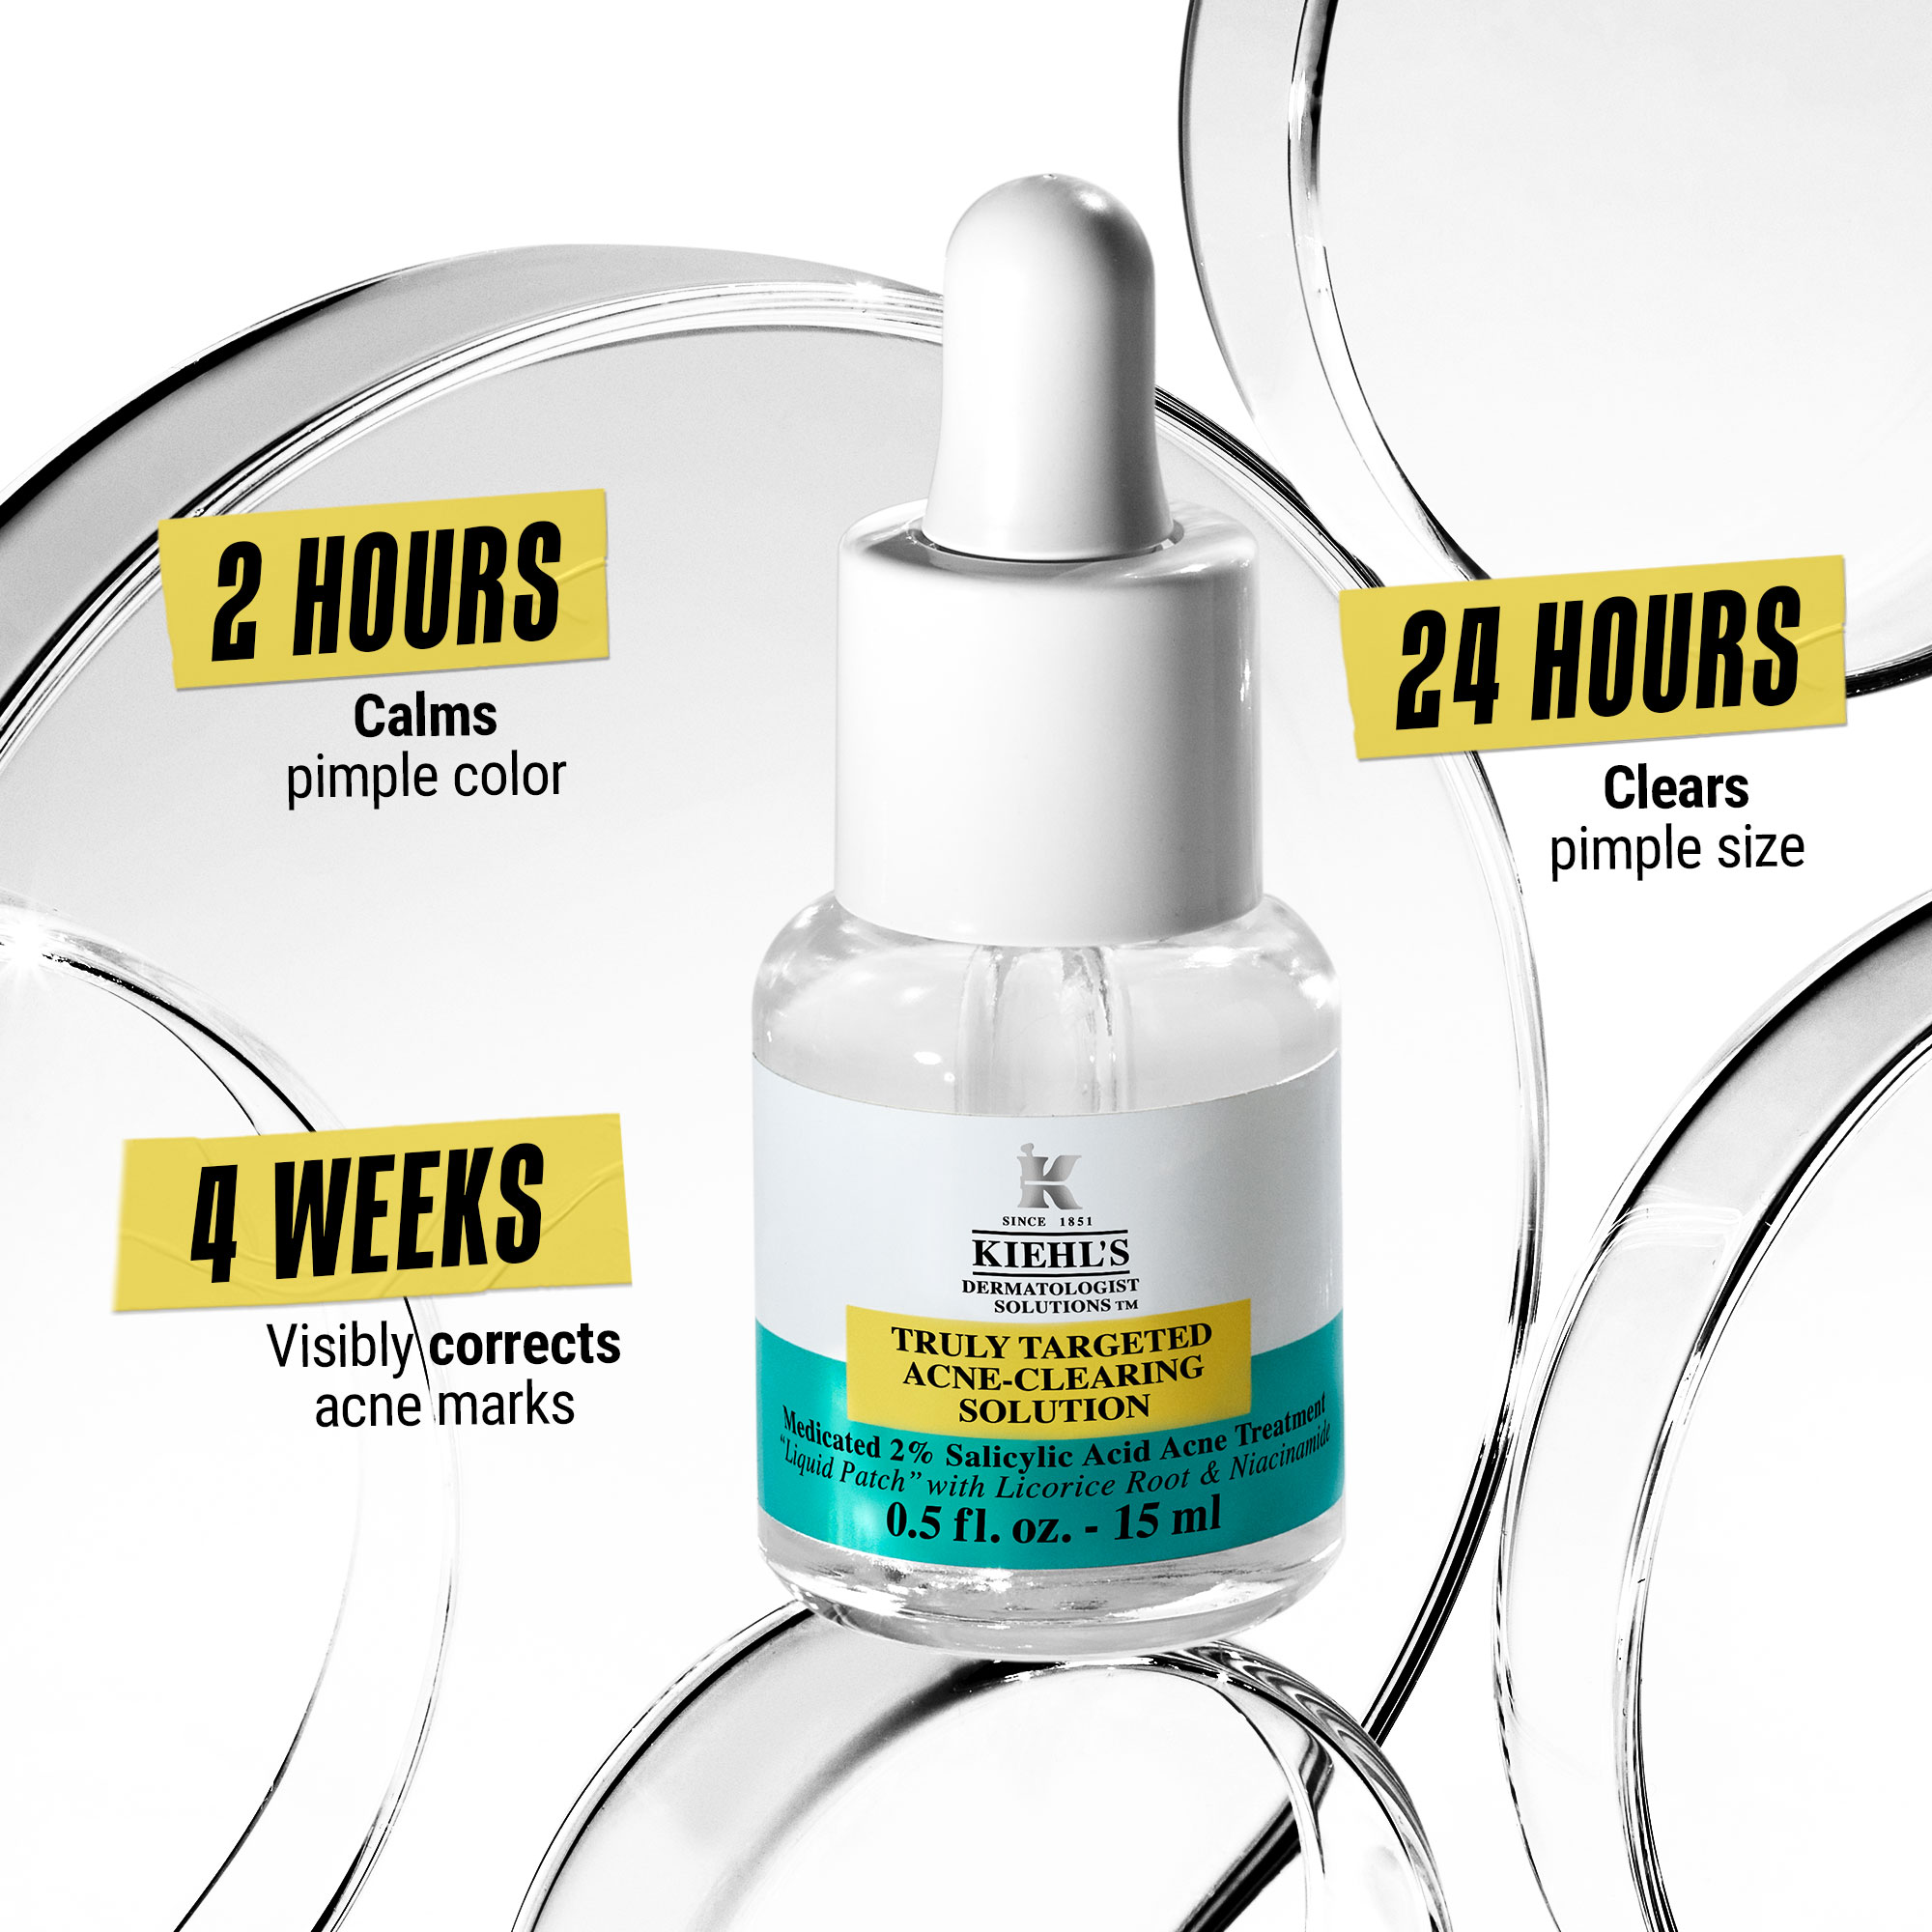 kiehls-acne-spot-truly-targeted-acne-clearing-solution-pdp-claims